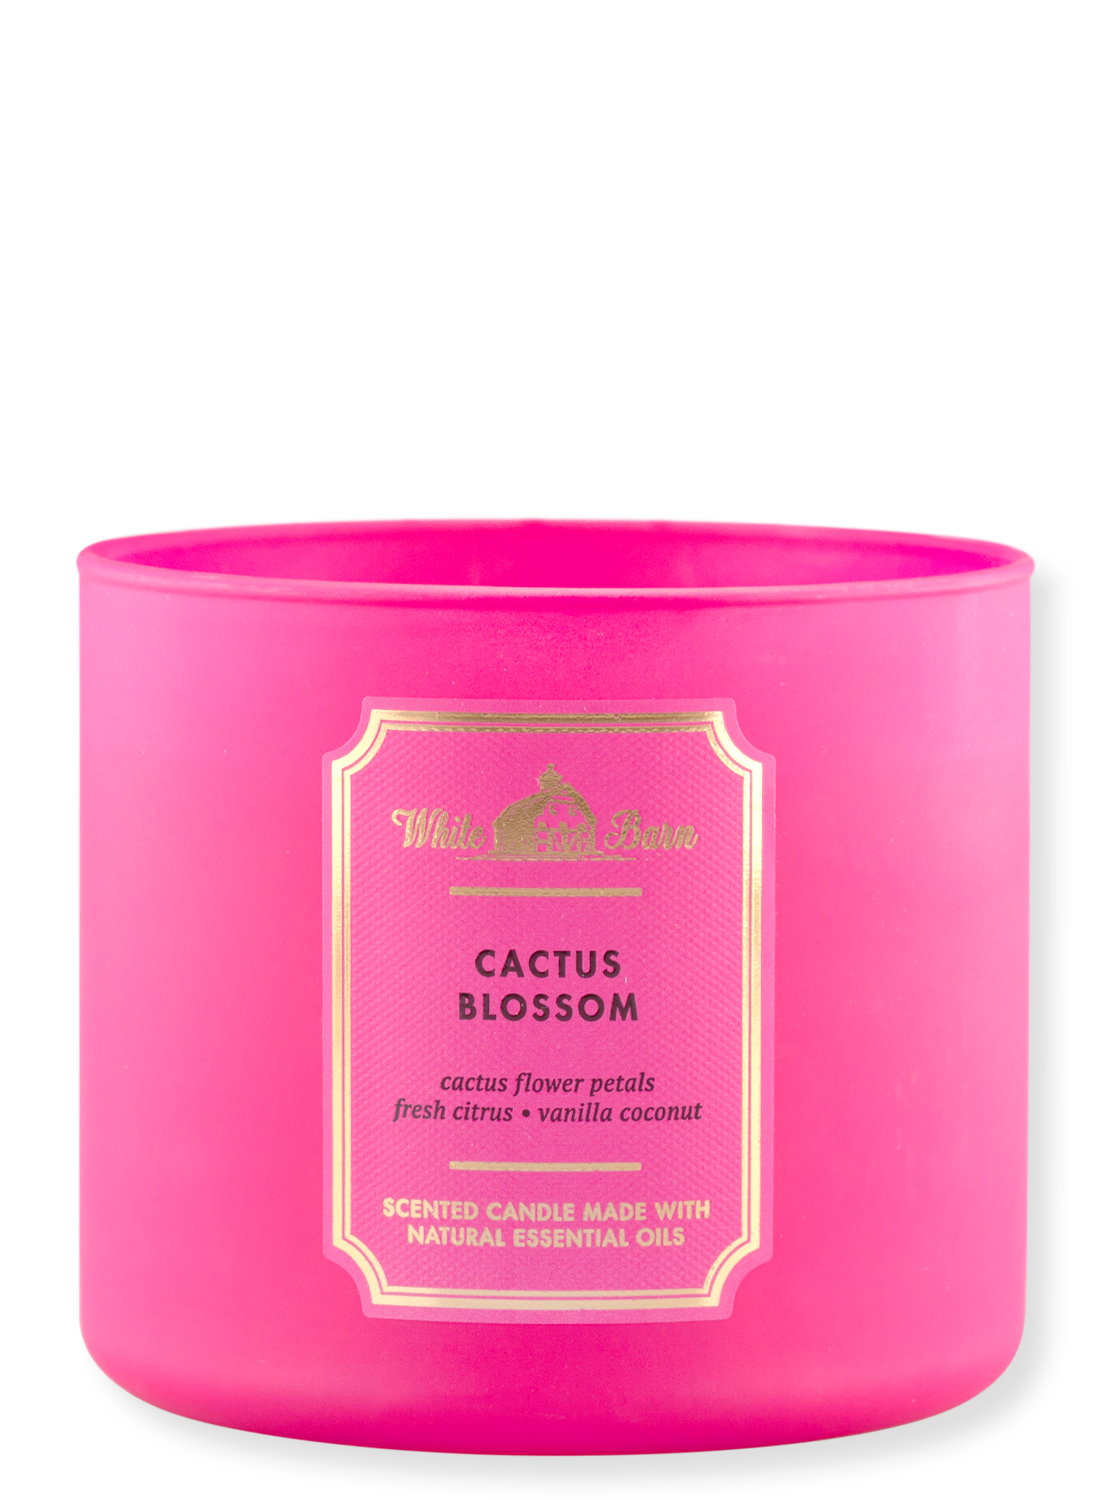 3-Wick Candle - Cactus Blossom - 411g